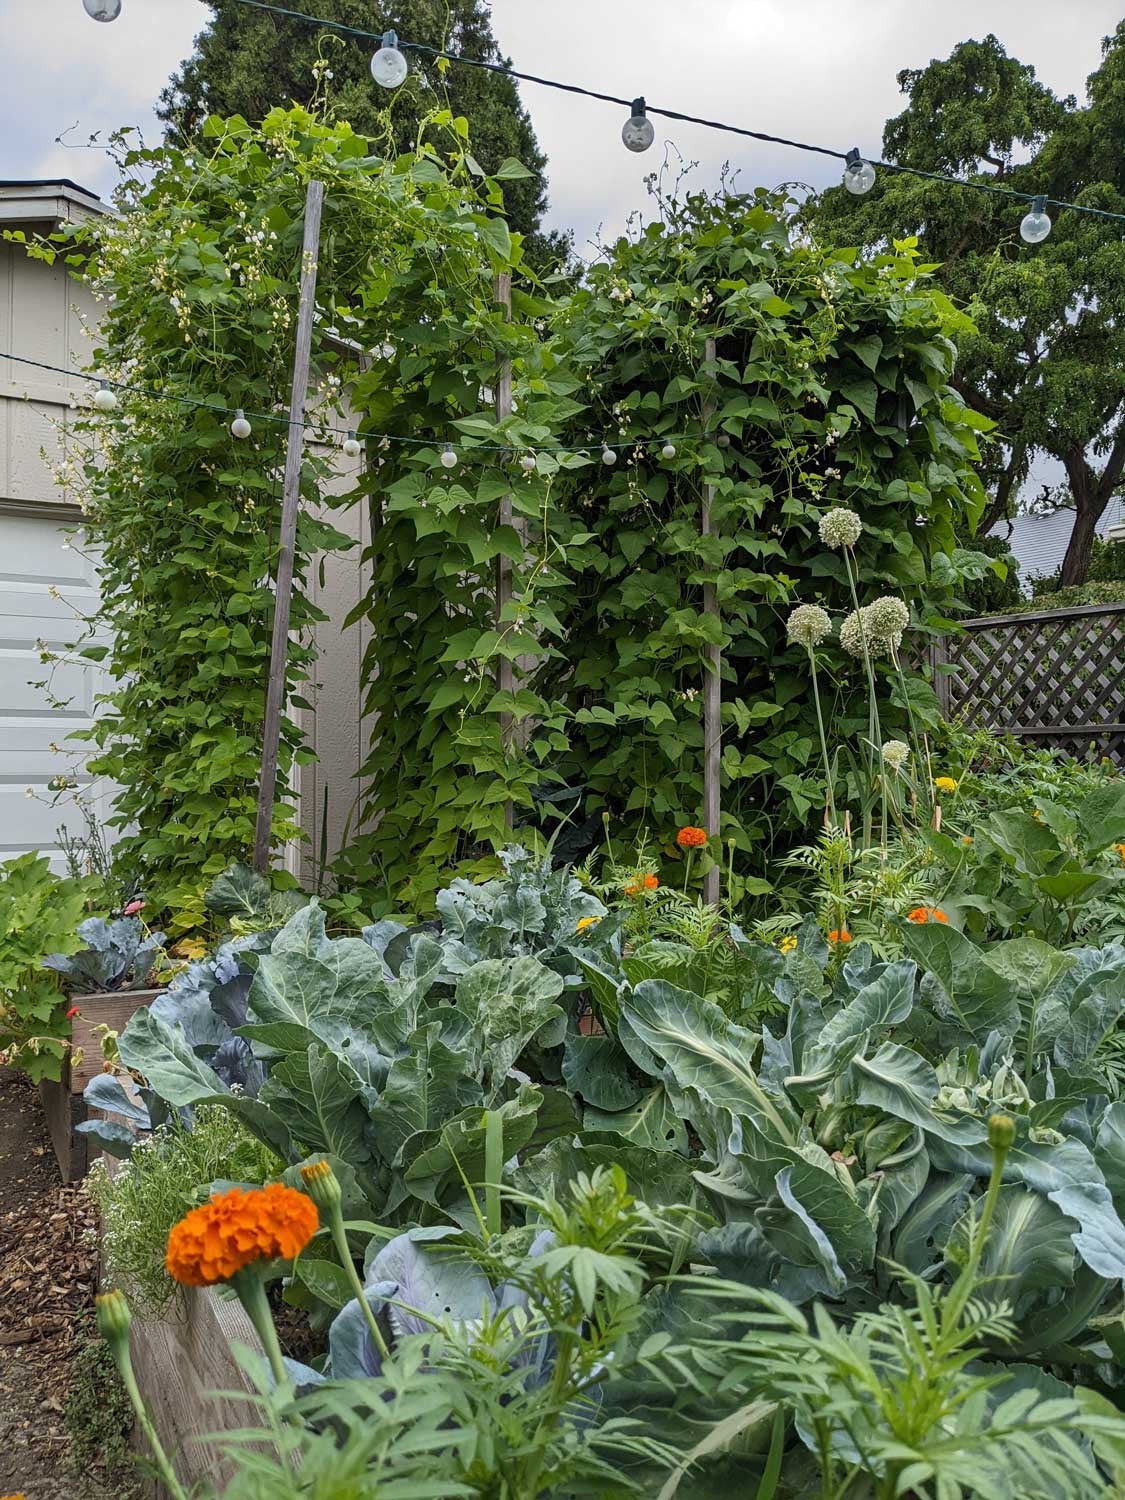 These tall trellises allow pole beans to climb infinitely, and create a focal point in the garden.  (Photo: Amanda Blum)